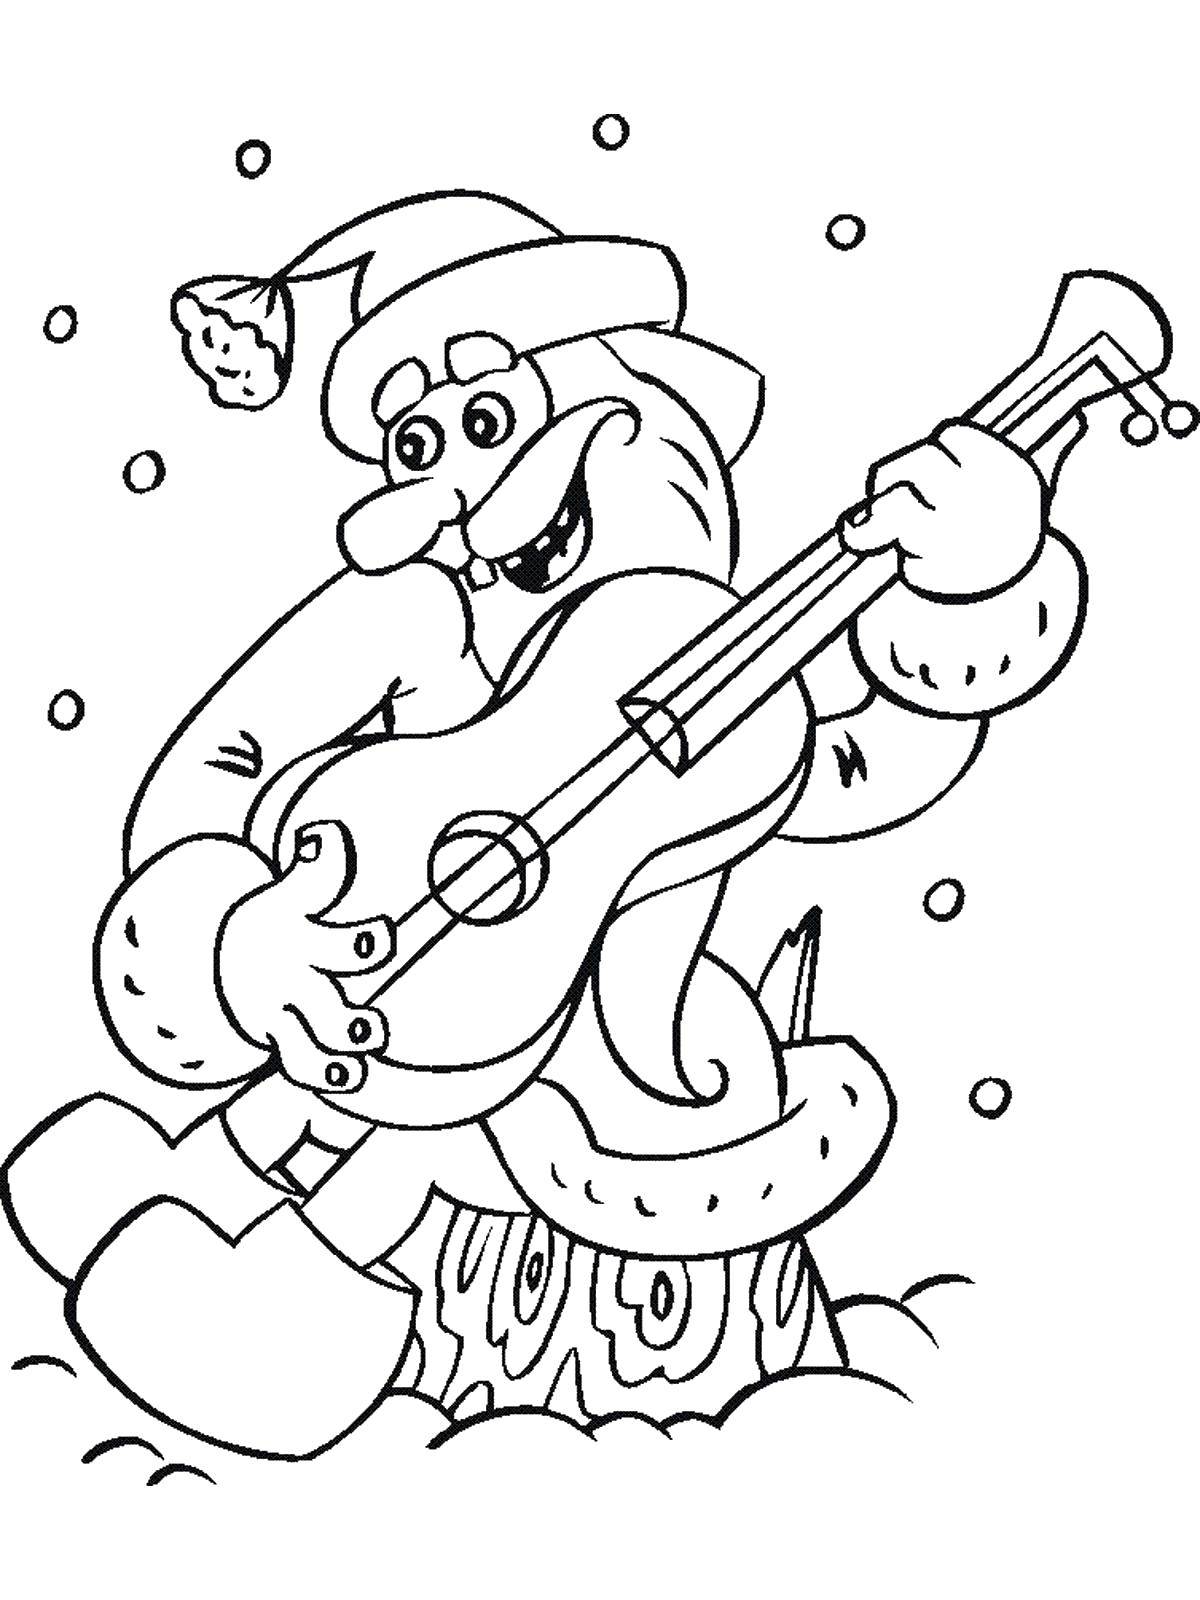 Coloring Santa Claus having fun in the woods. Category Santa Claus. Tags:  New Year, Santa Claus, Santa Claus, gifts.